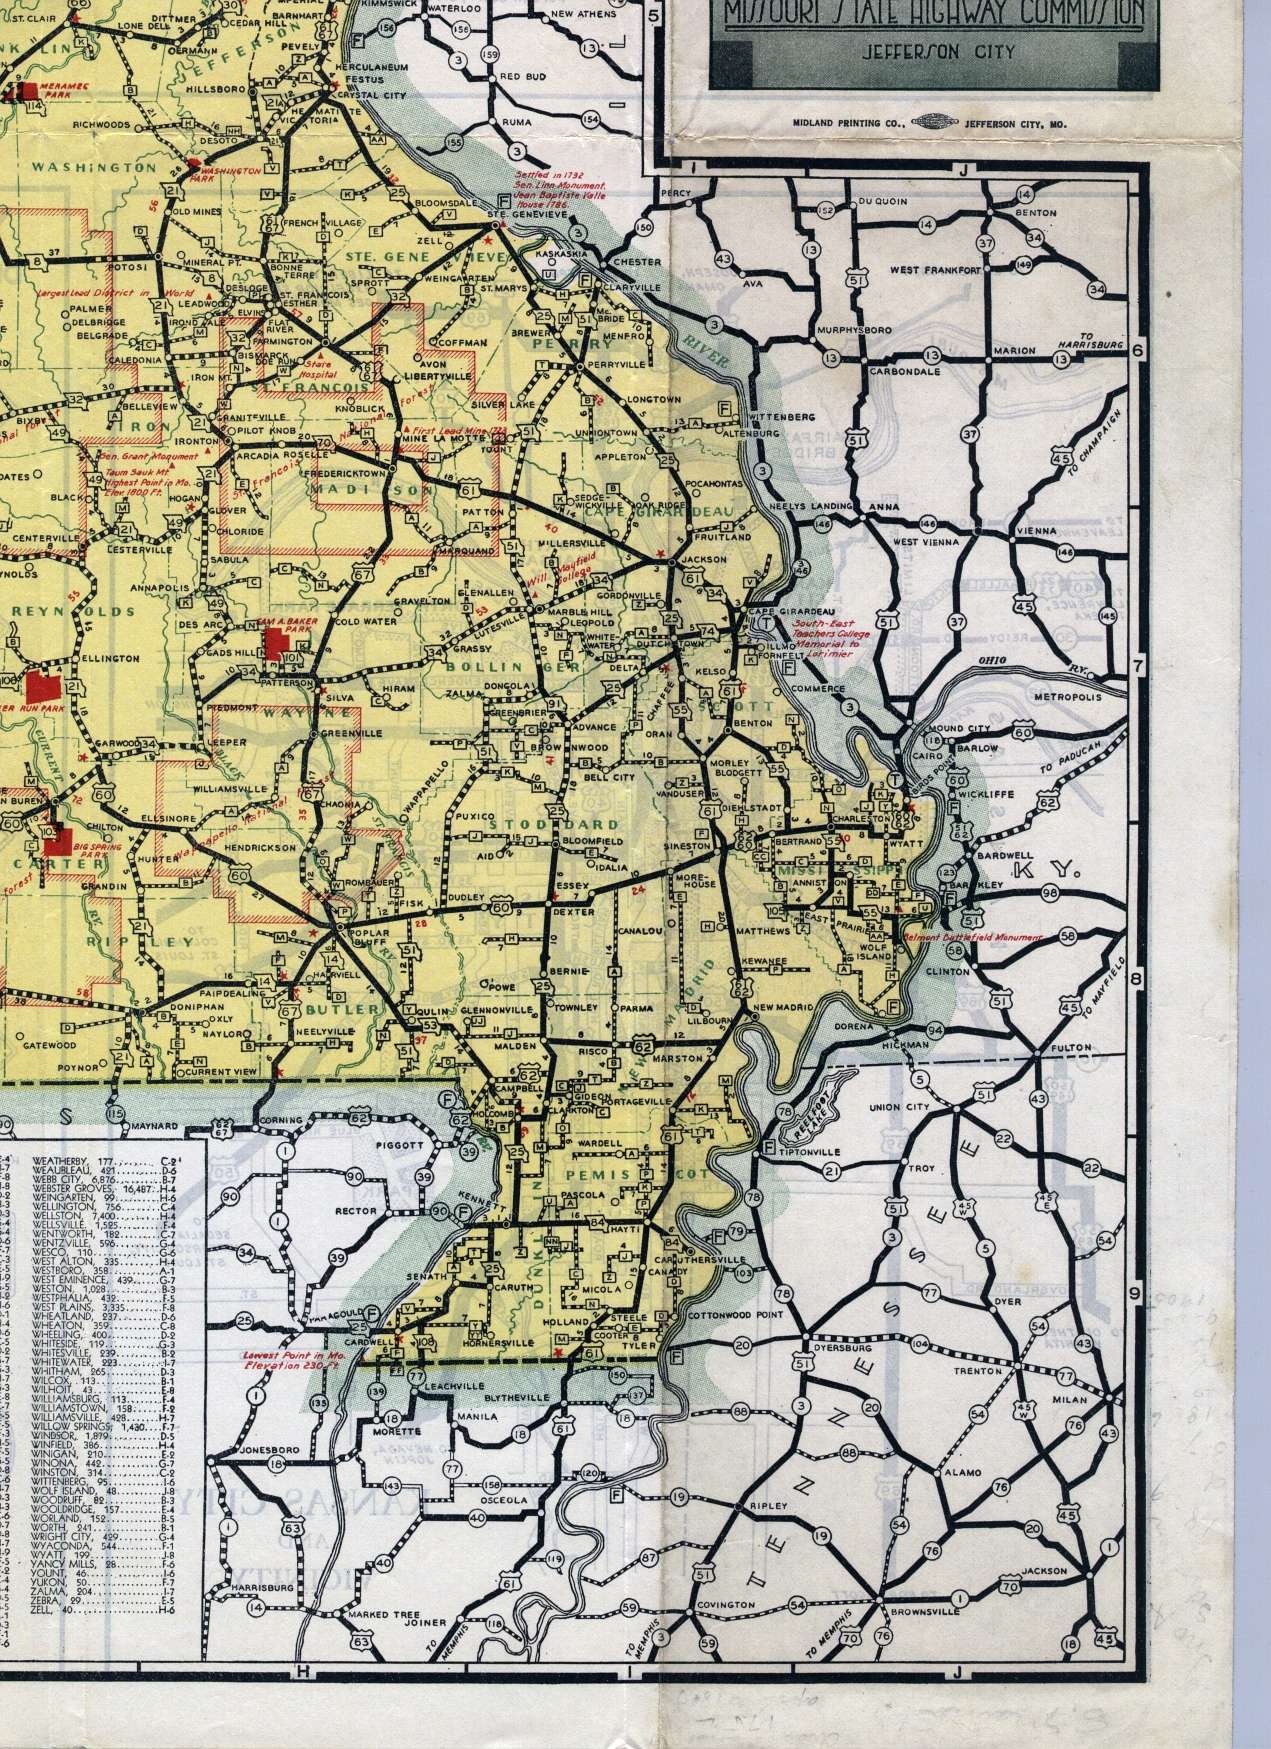 Section of 1938 official highway map for Missouri